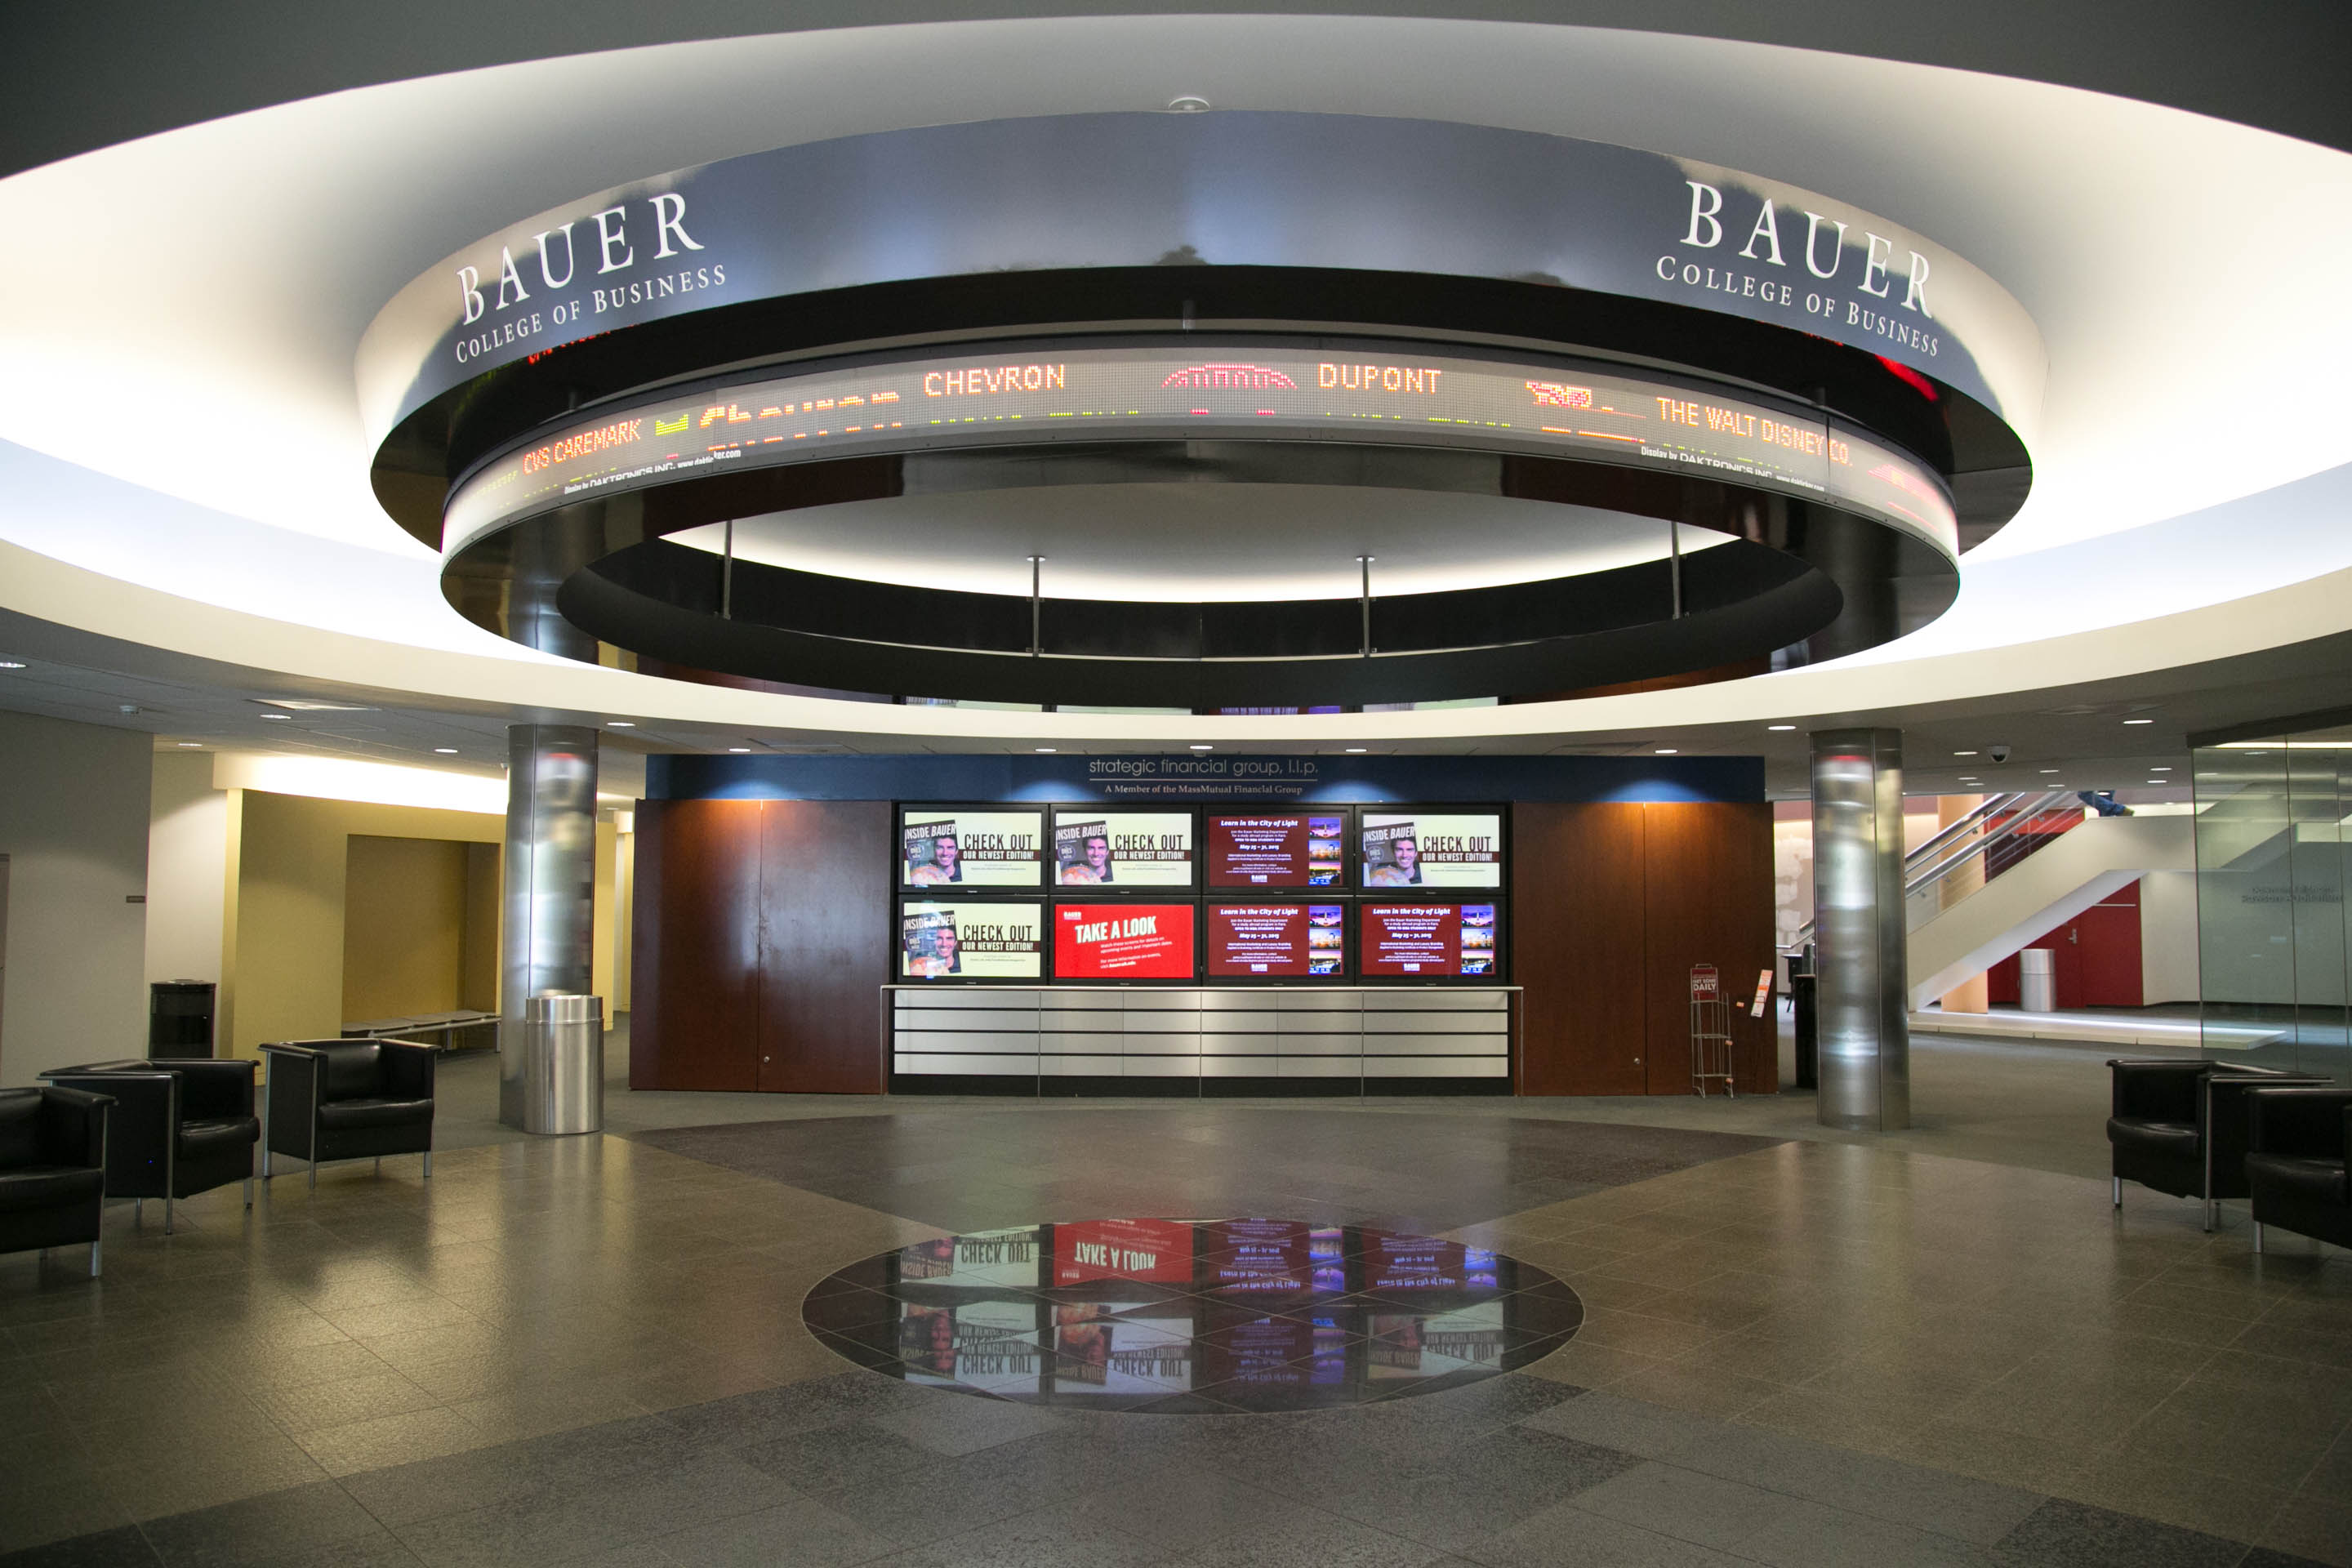 Bauer College of Business
University of Houston